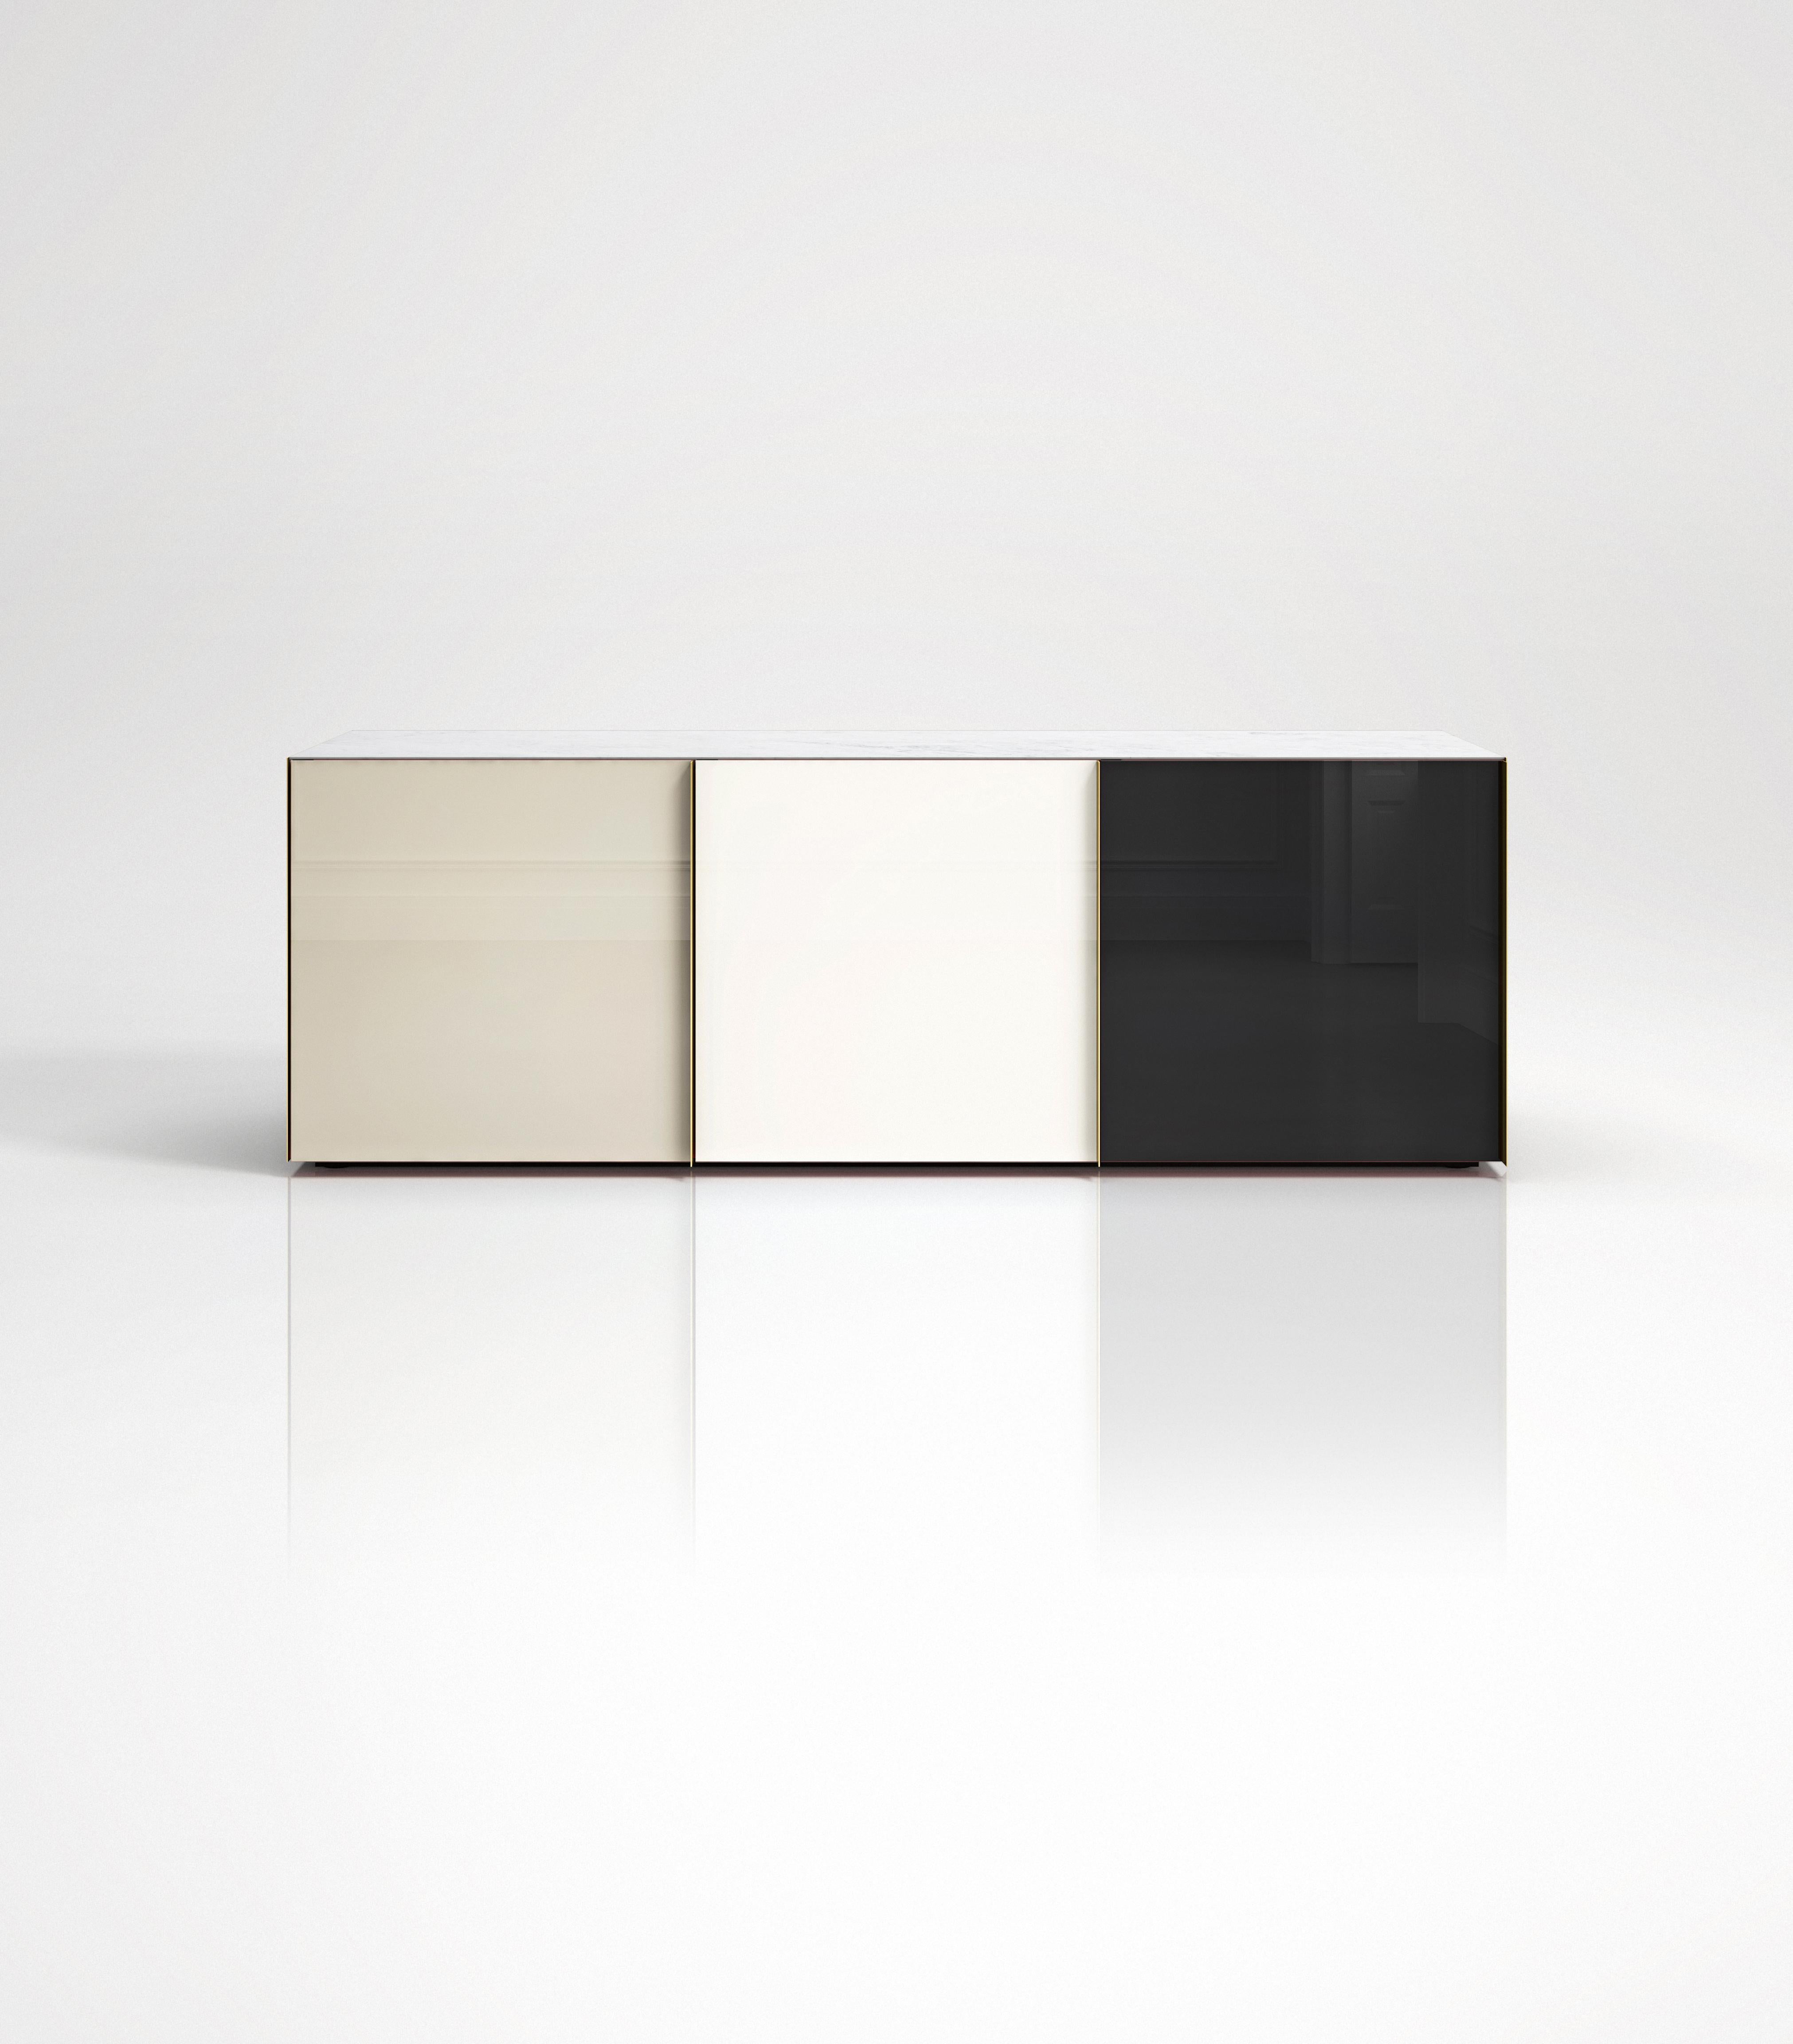 Sideboard 01
Sideboard featuring 3 back-painted glass doors colored in neutral tones, Carrara marble top, lacquered wooden interior and brass handles and side panels. Each of the three compartments has an internal glass shelf. It can be placed in